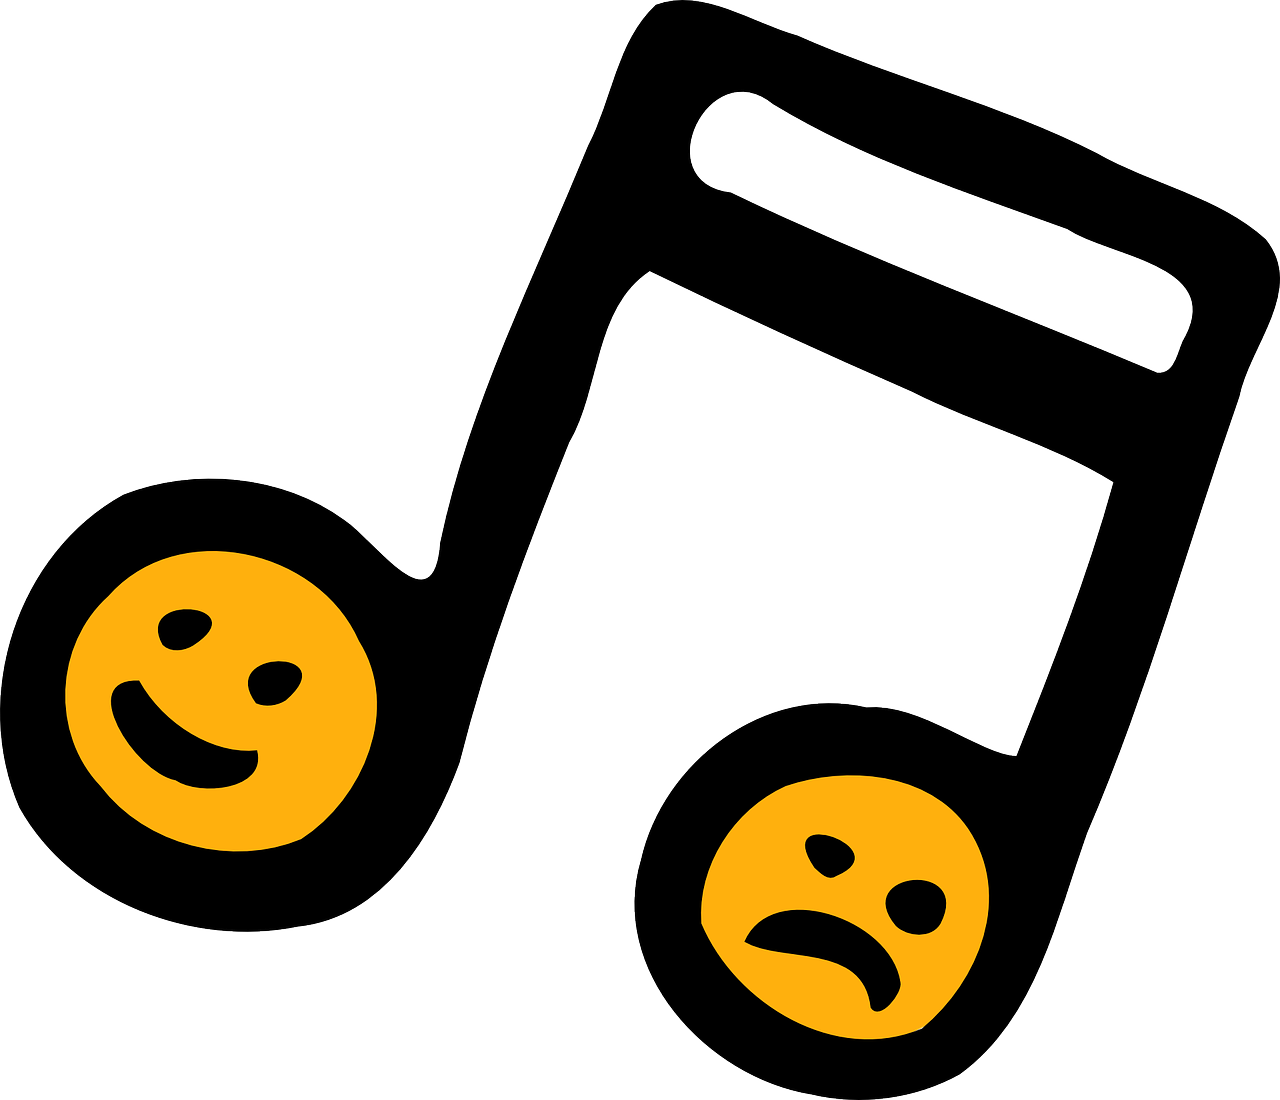 A Group Of Yellow Smiley Faces On A Black Background